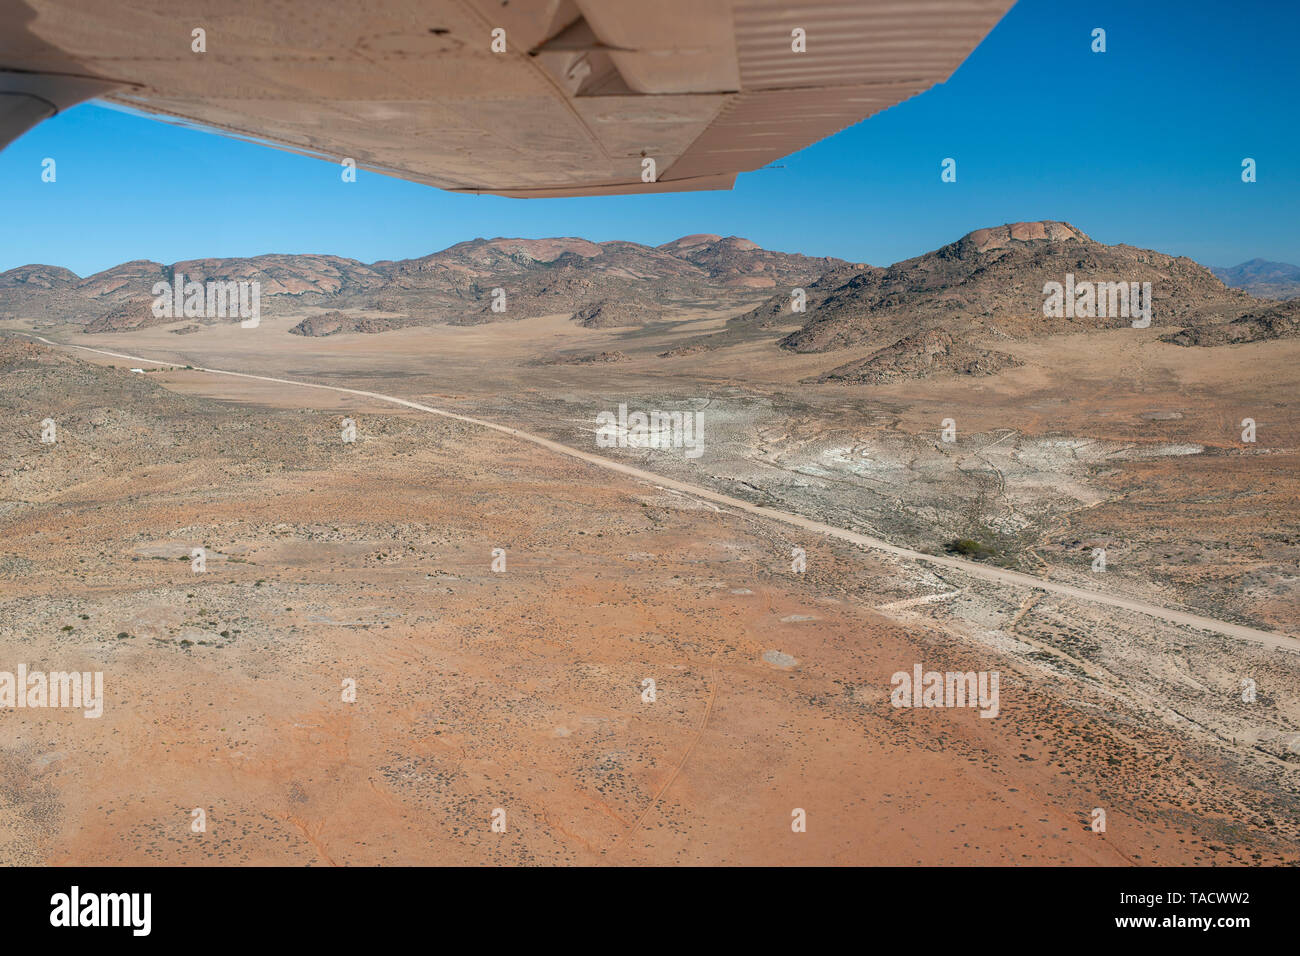 Aerial view of the landscape south of the town of Springbok in the Northern Cape Province of South Africa. Stock Photo